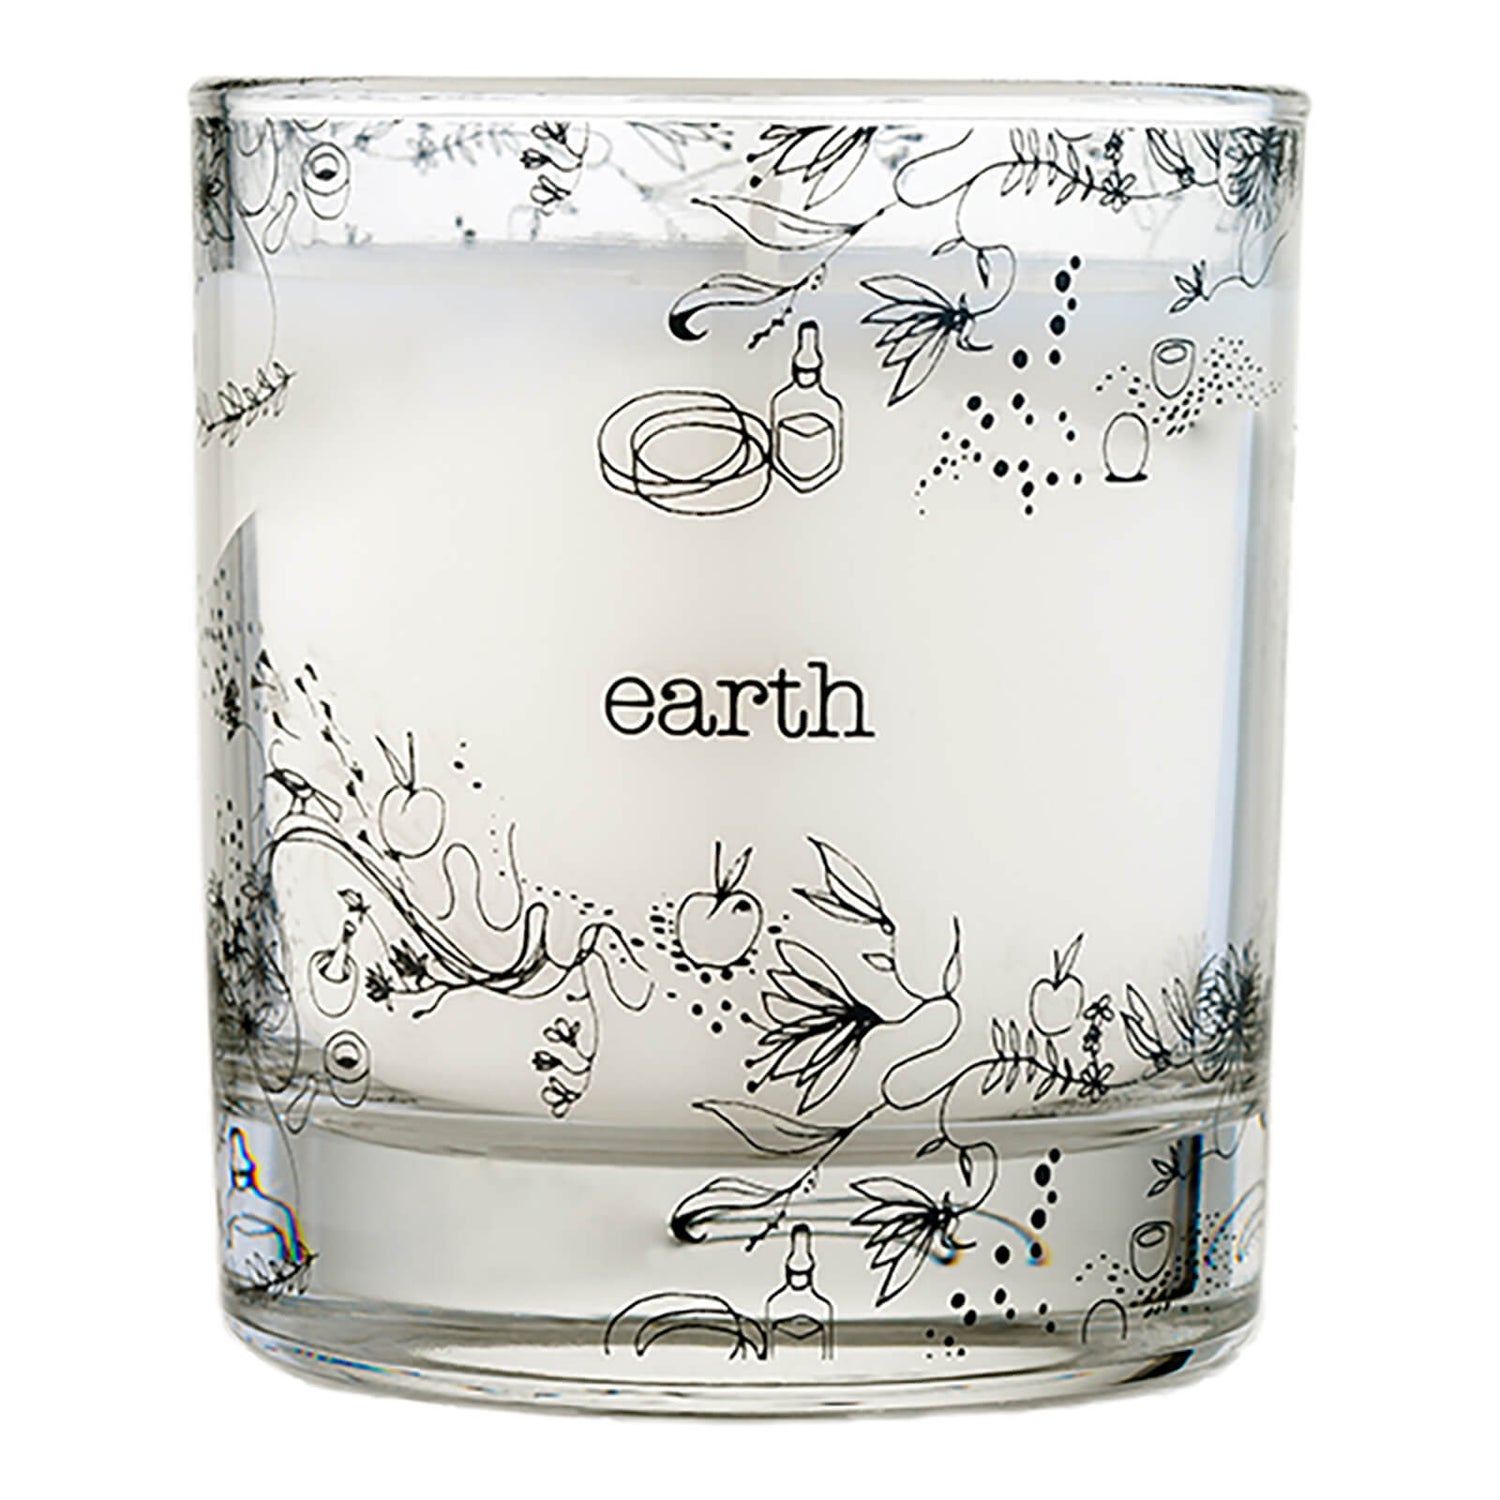 Elemental Herbology Five Element Aromatherapy Earth Candle